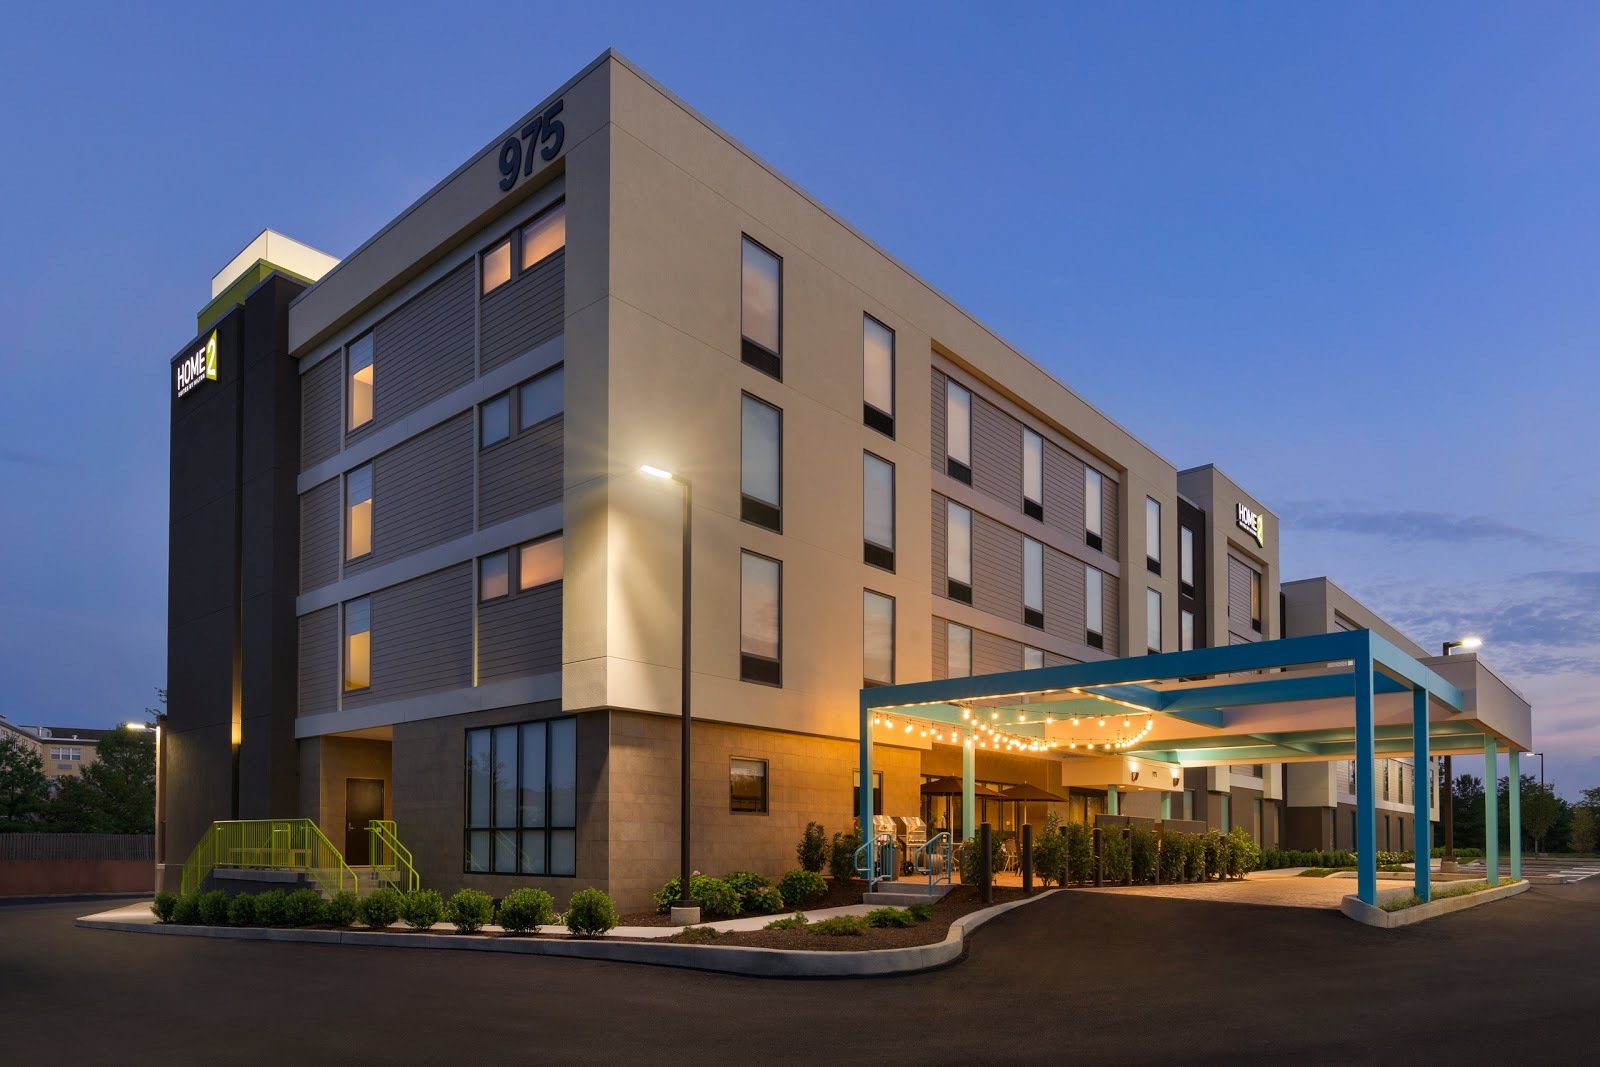 Photo of Home2 Suites by Hilton Downingtown Exton Route 30, Downingtown, PA